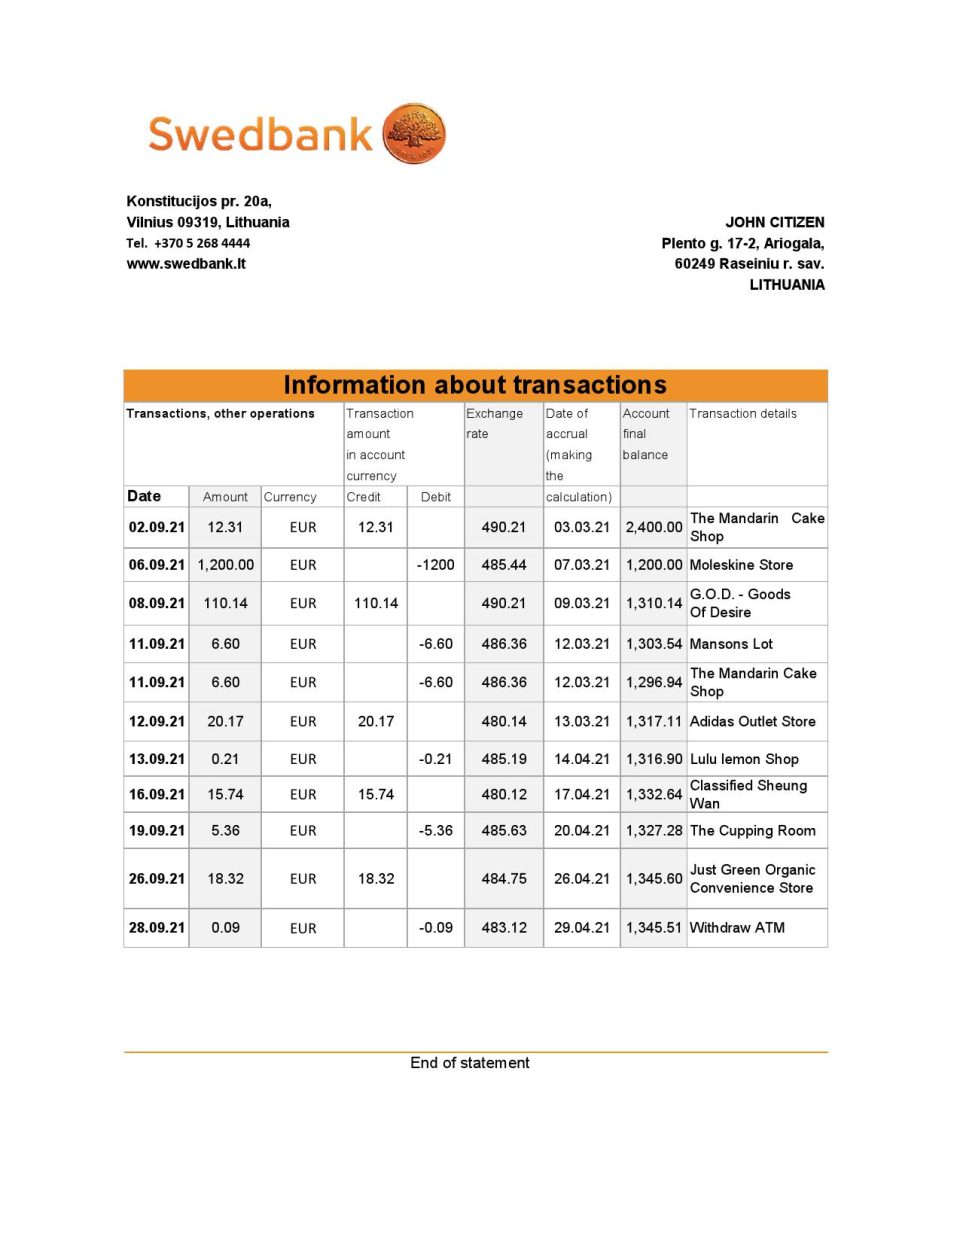 Lithuania Swedbank bank statement easy to fill template in .xls and .pdf file format